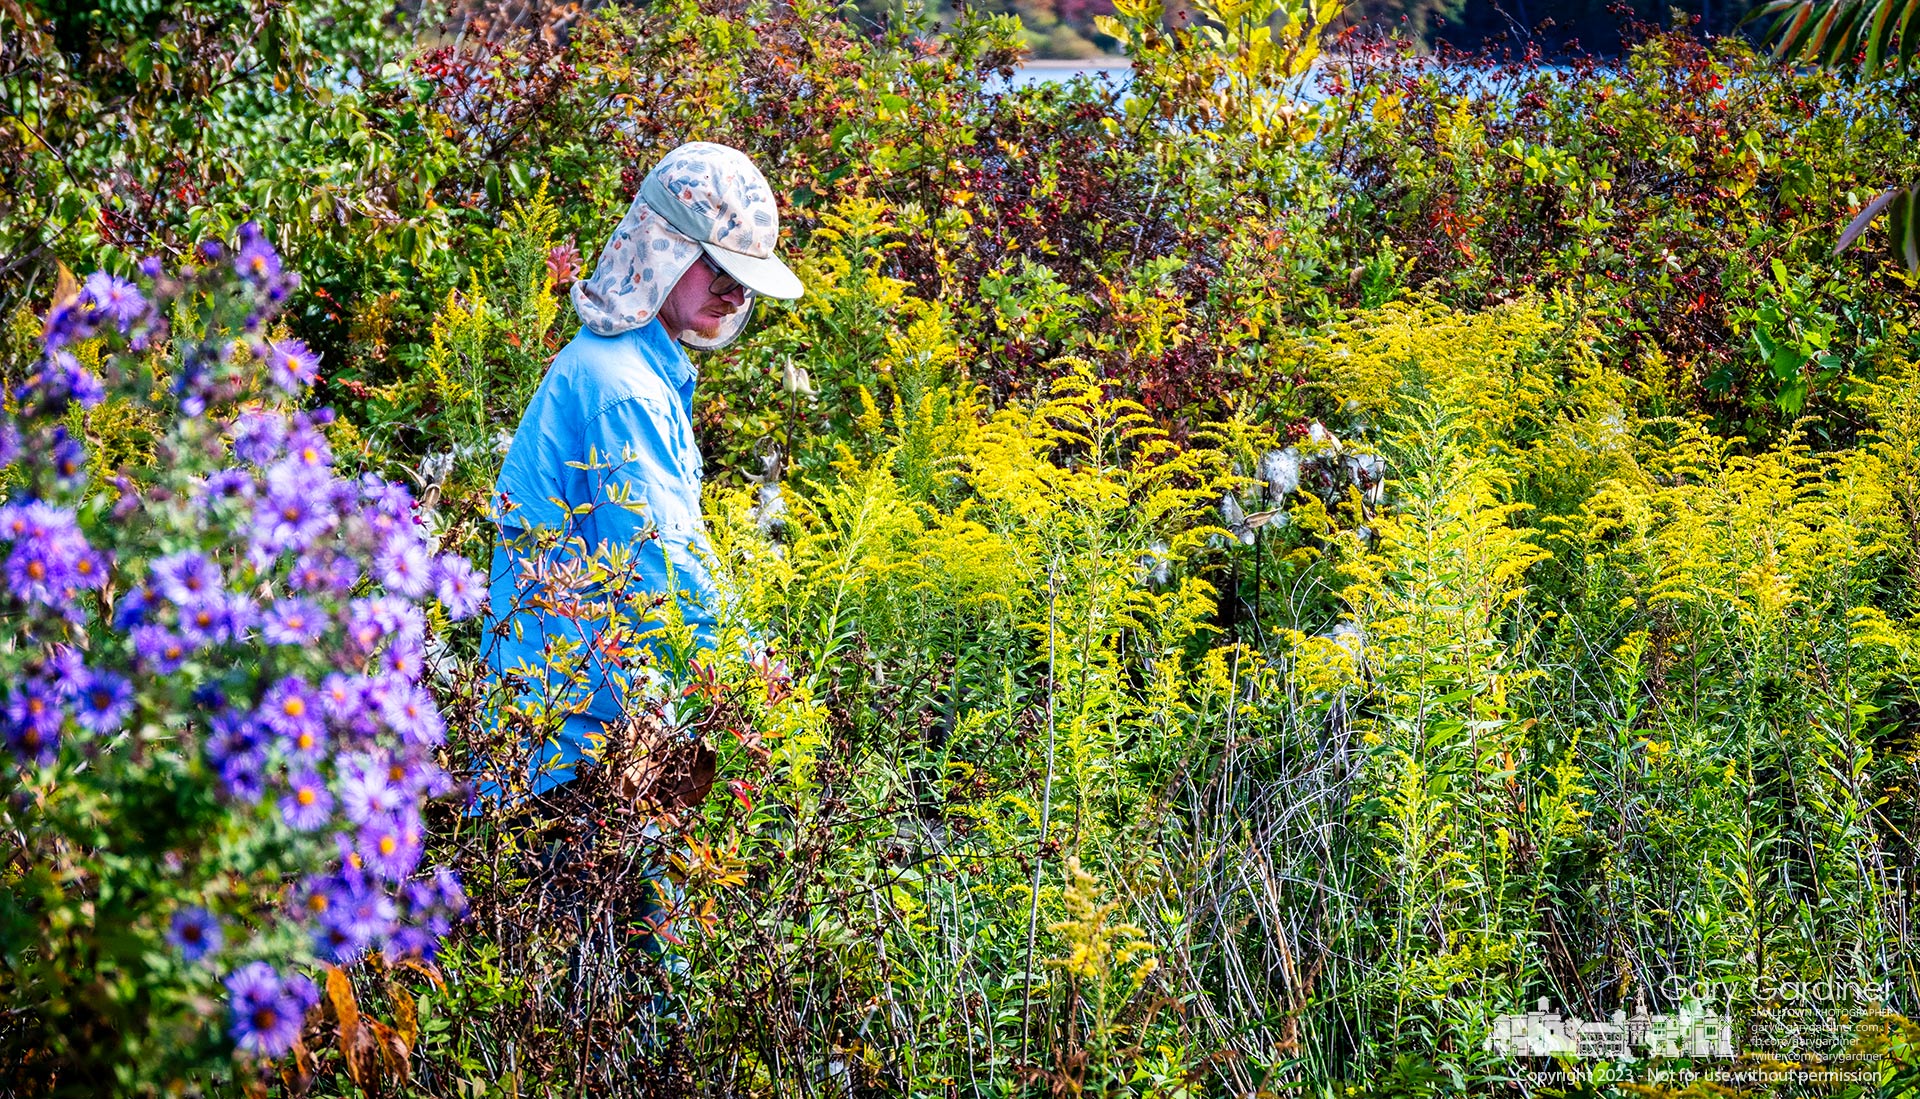 A contract work crew clears invasive late goldenrod from the rain garden at Walnut Boat Ramp as the city clears the weed from some areas of the park. My Final Photo for October 13, 2023.